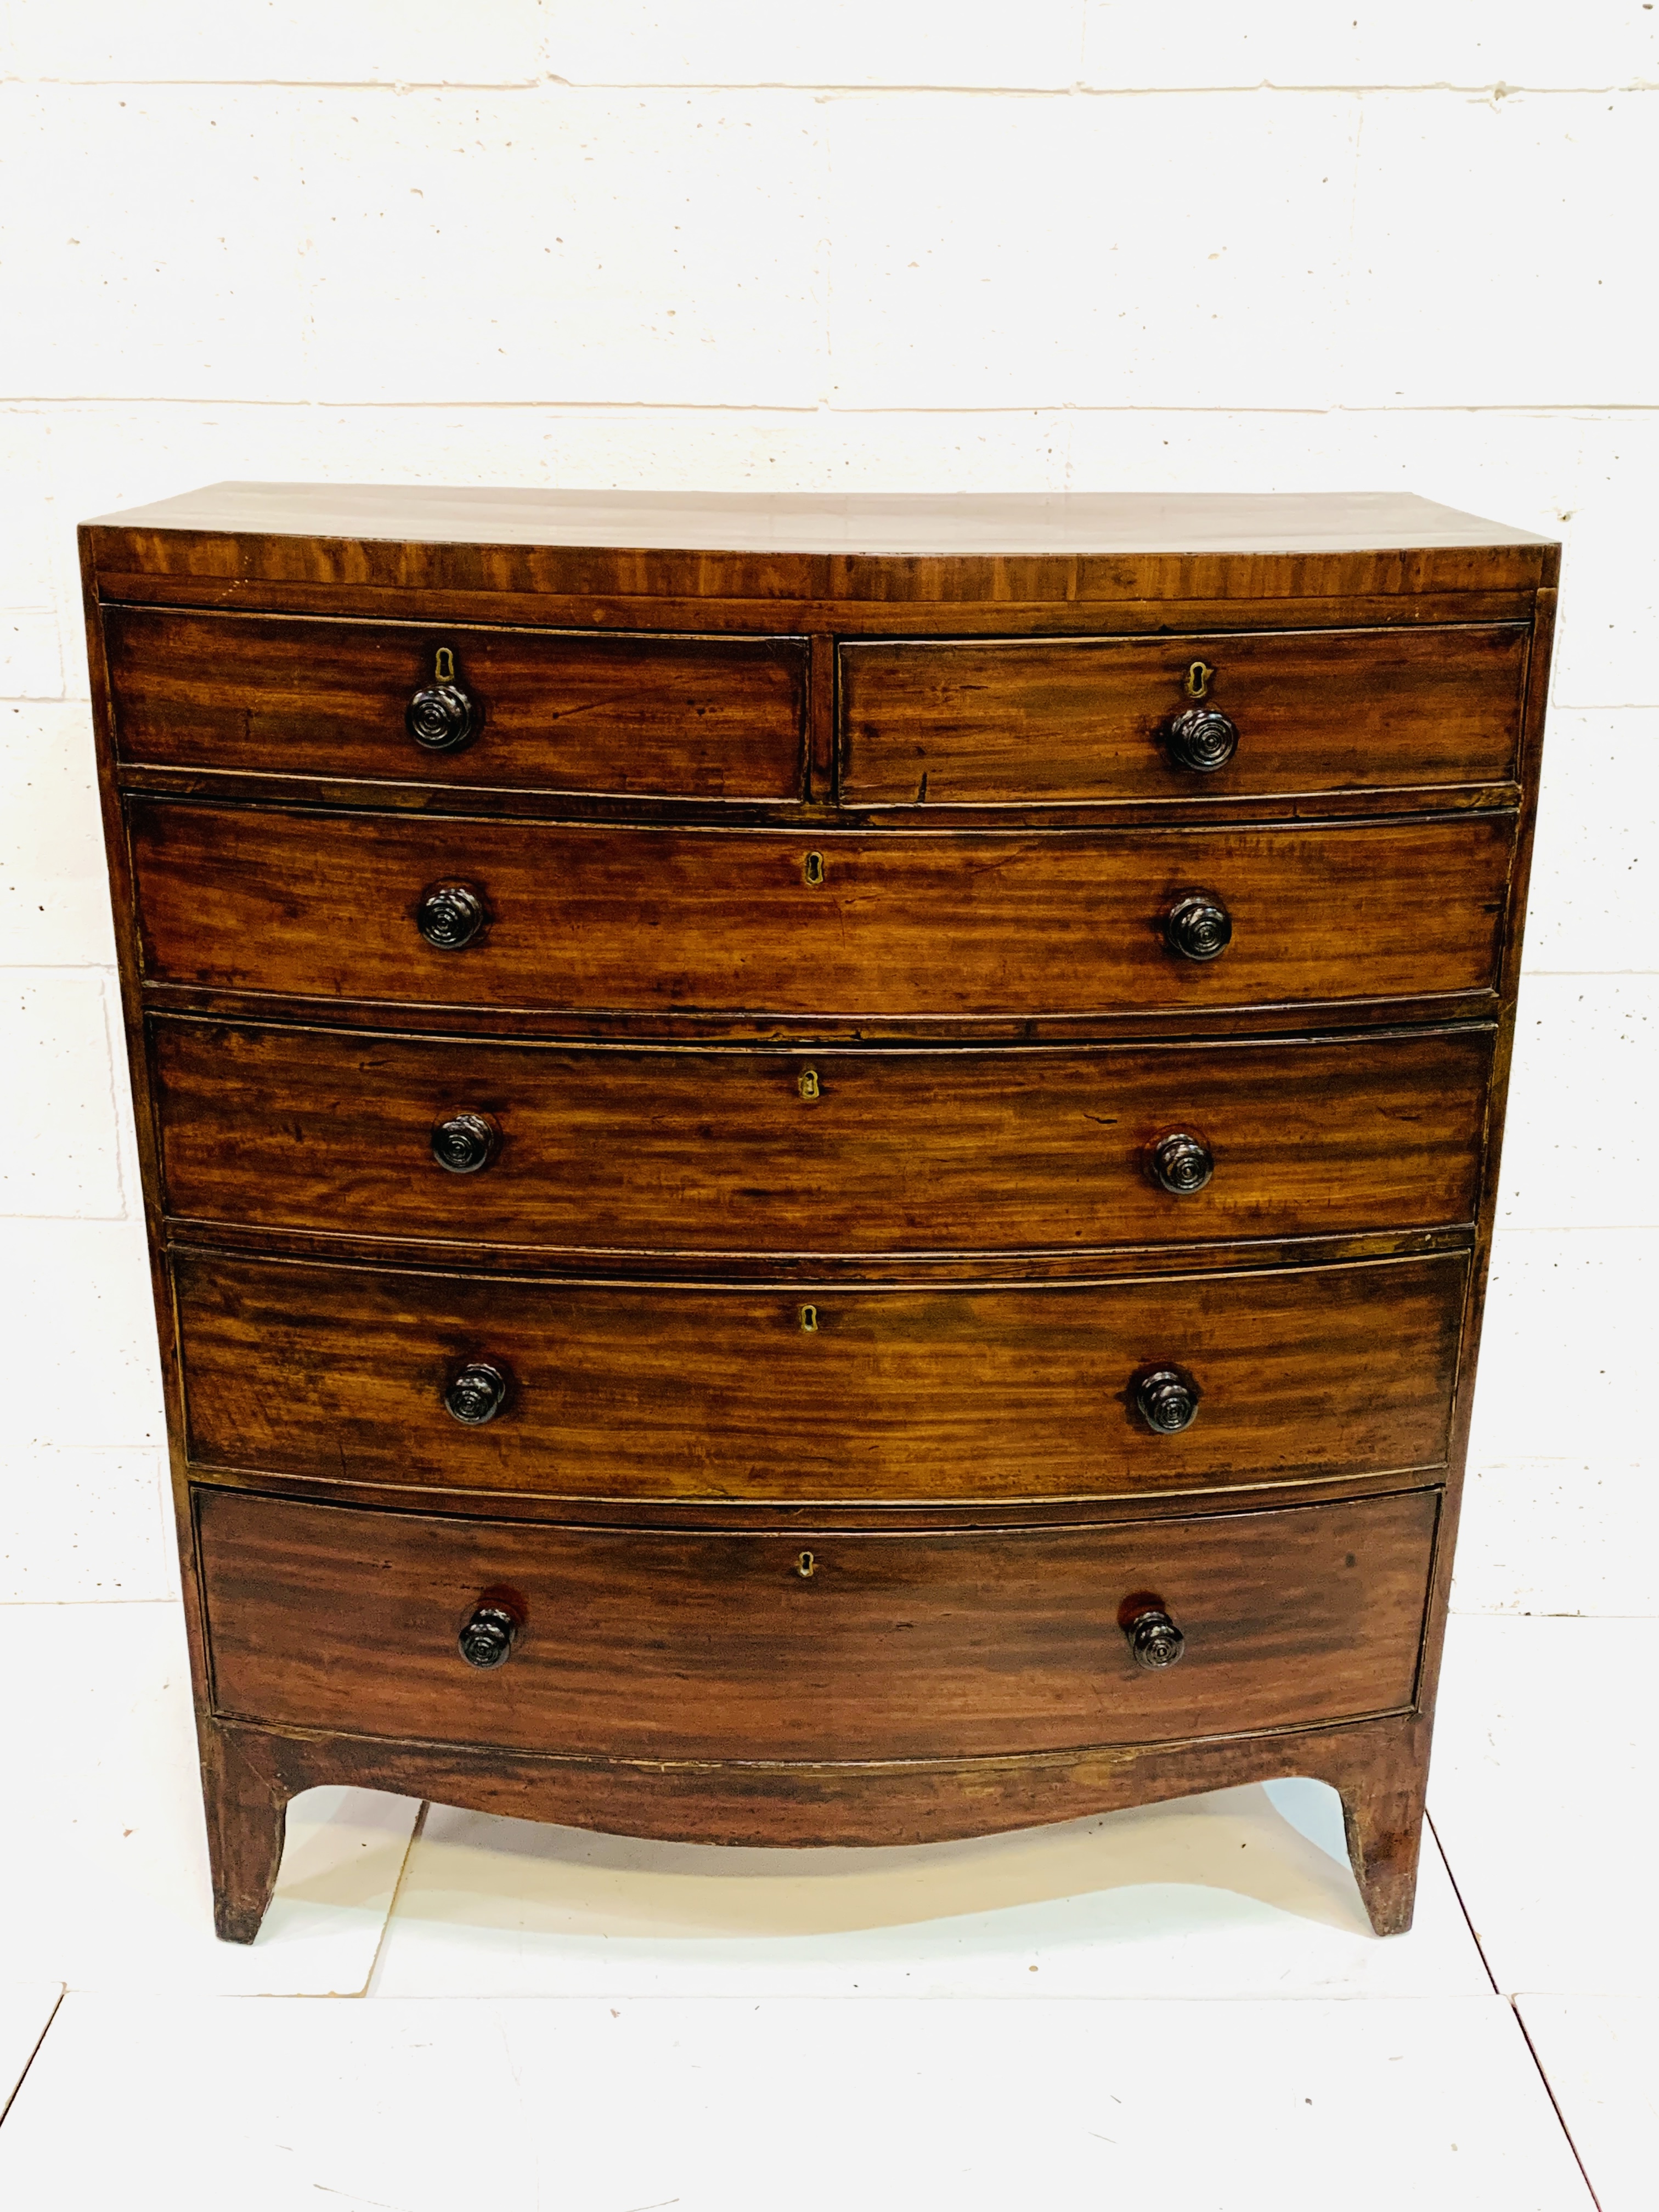 Early 19th Century mahogany bow-fronted chest of drawers - Image 2 of 8